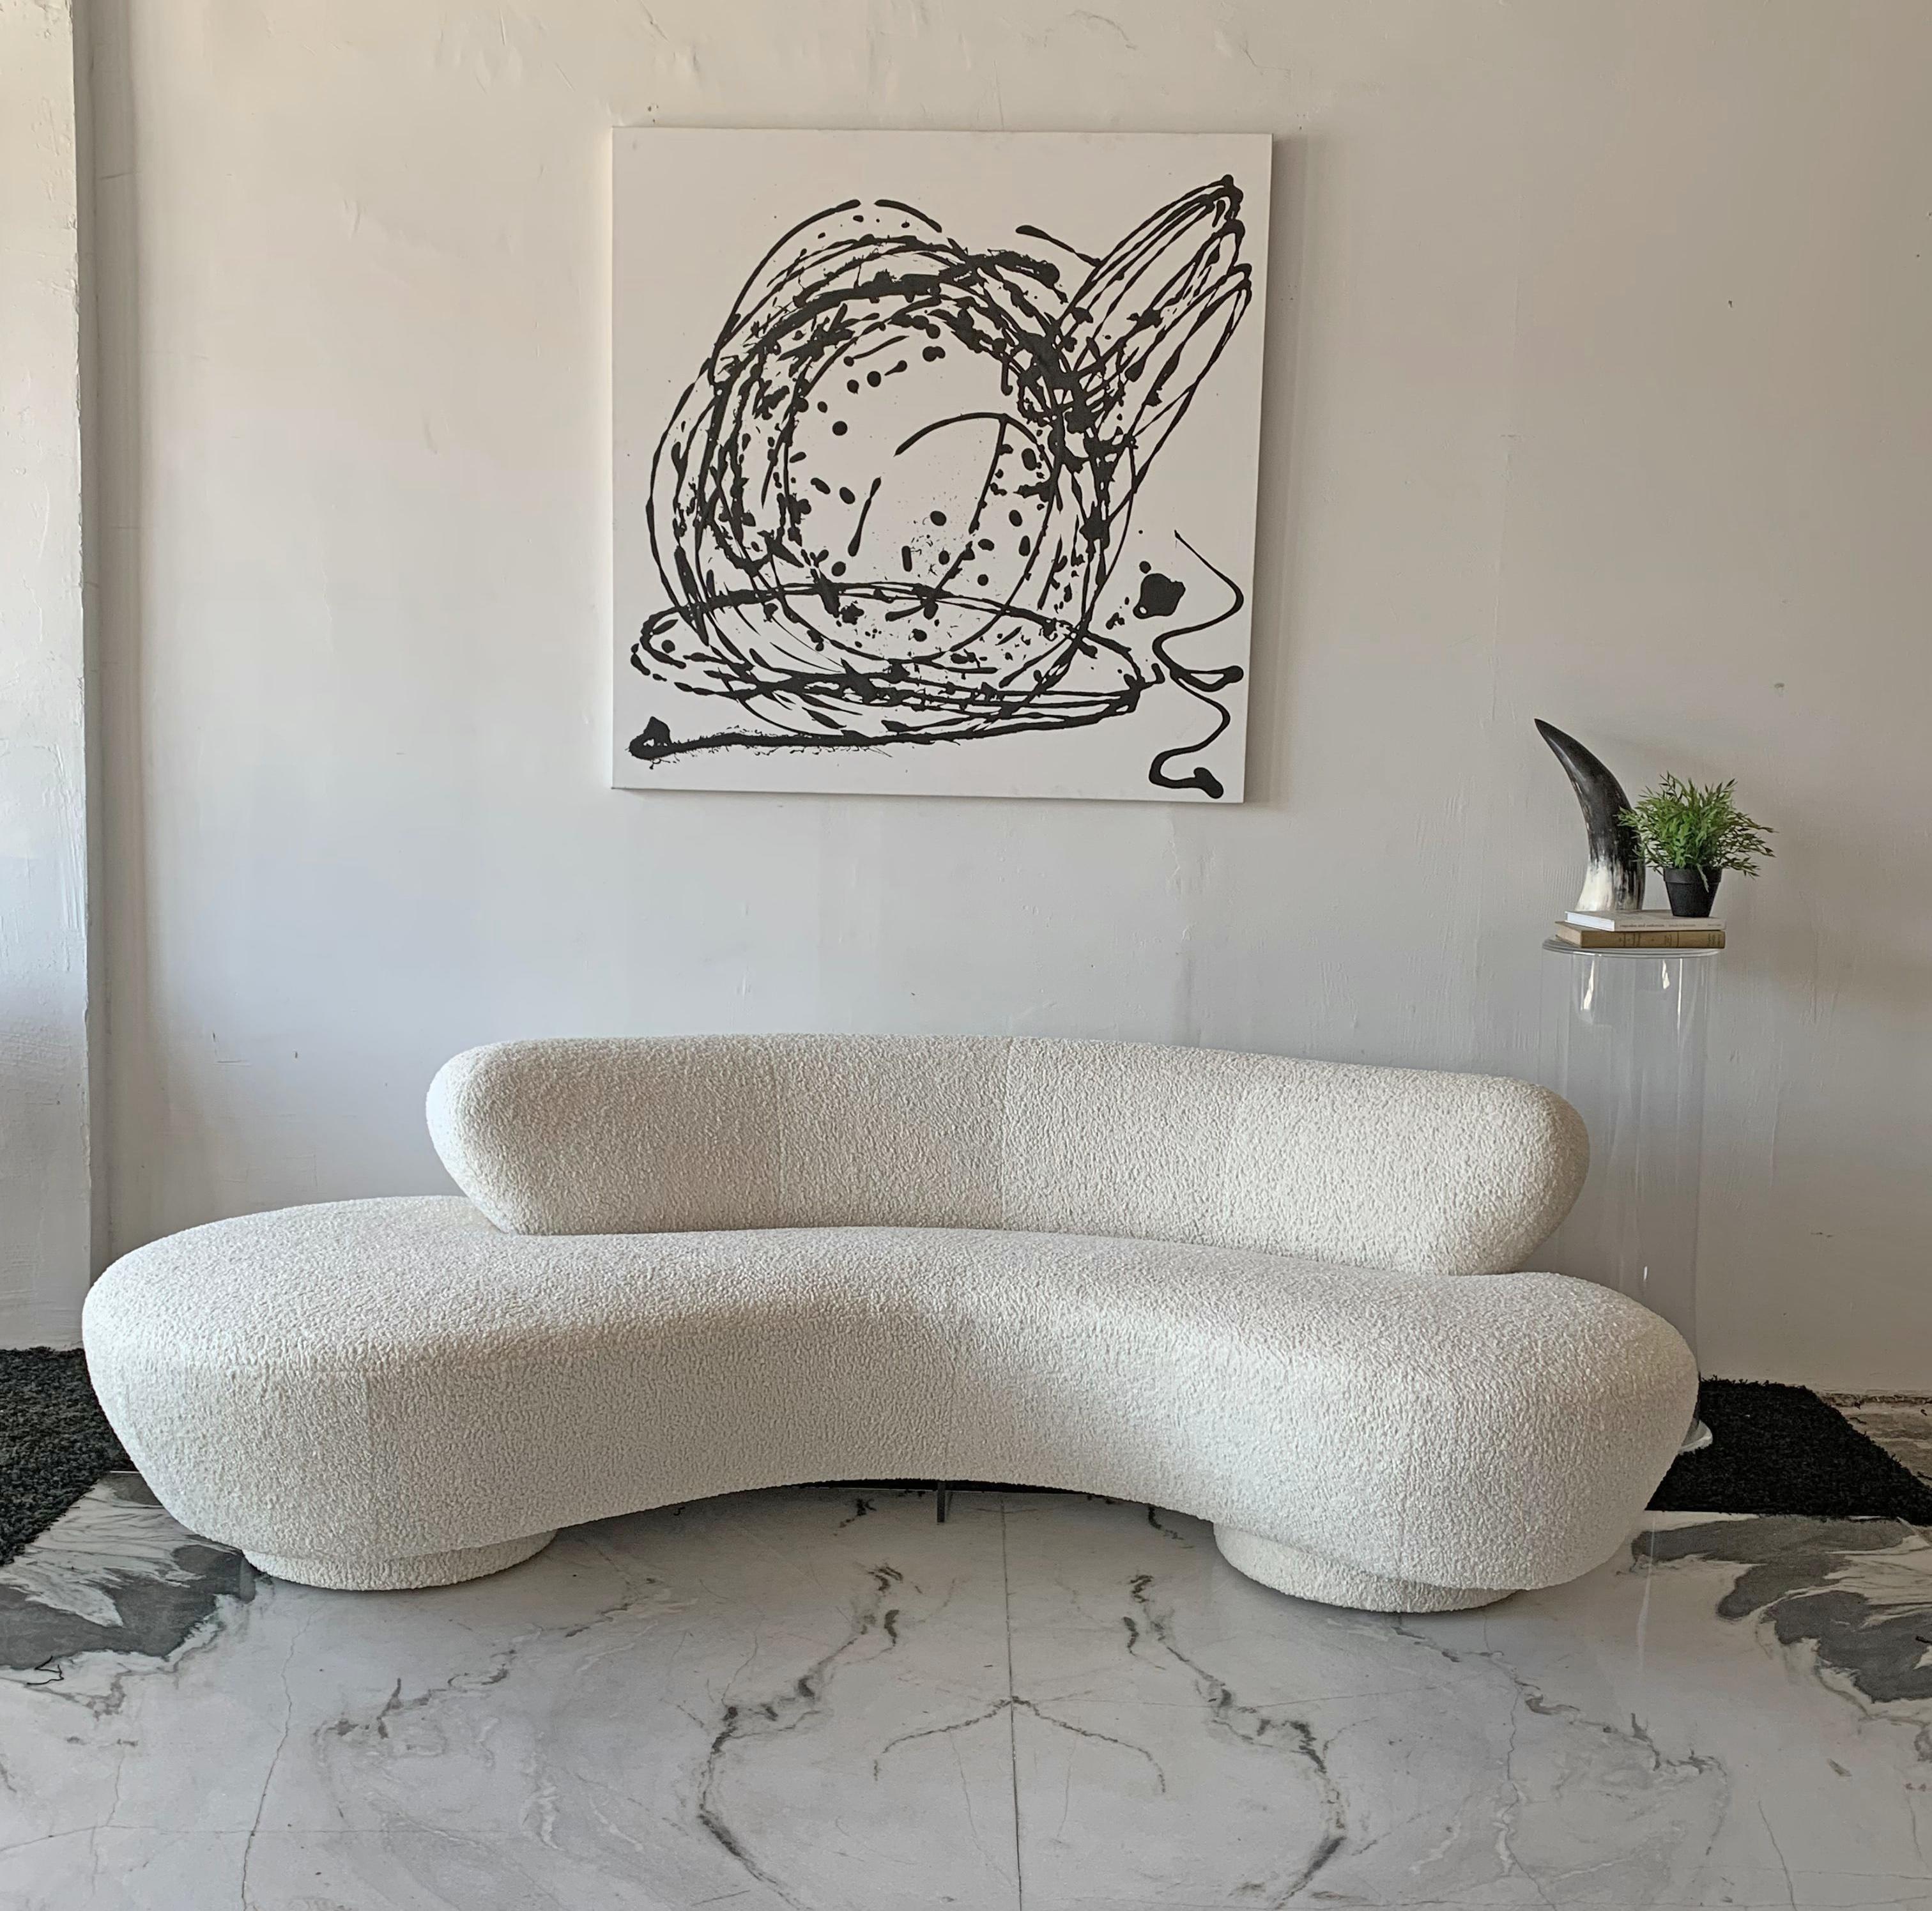 This Vladimir Kagan sofa is absolutely stunning! It’s obvious why Vladimir Kagan furniture is more in demand than ever. This show-stopping Kagan sofa is not only a visual feast; the sofa features a curvy biomorphic design that's not only chic and